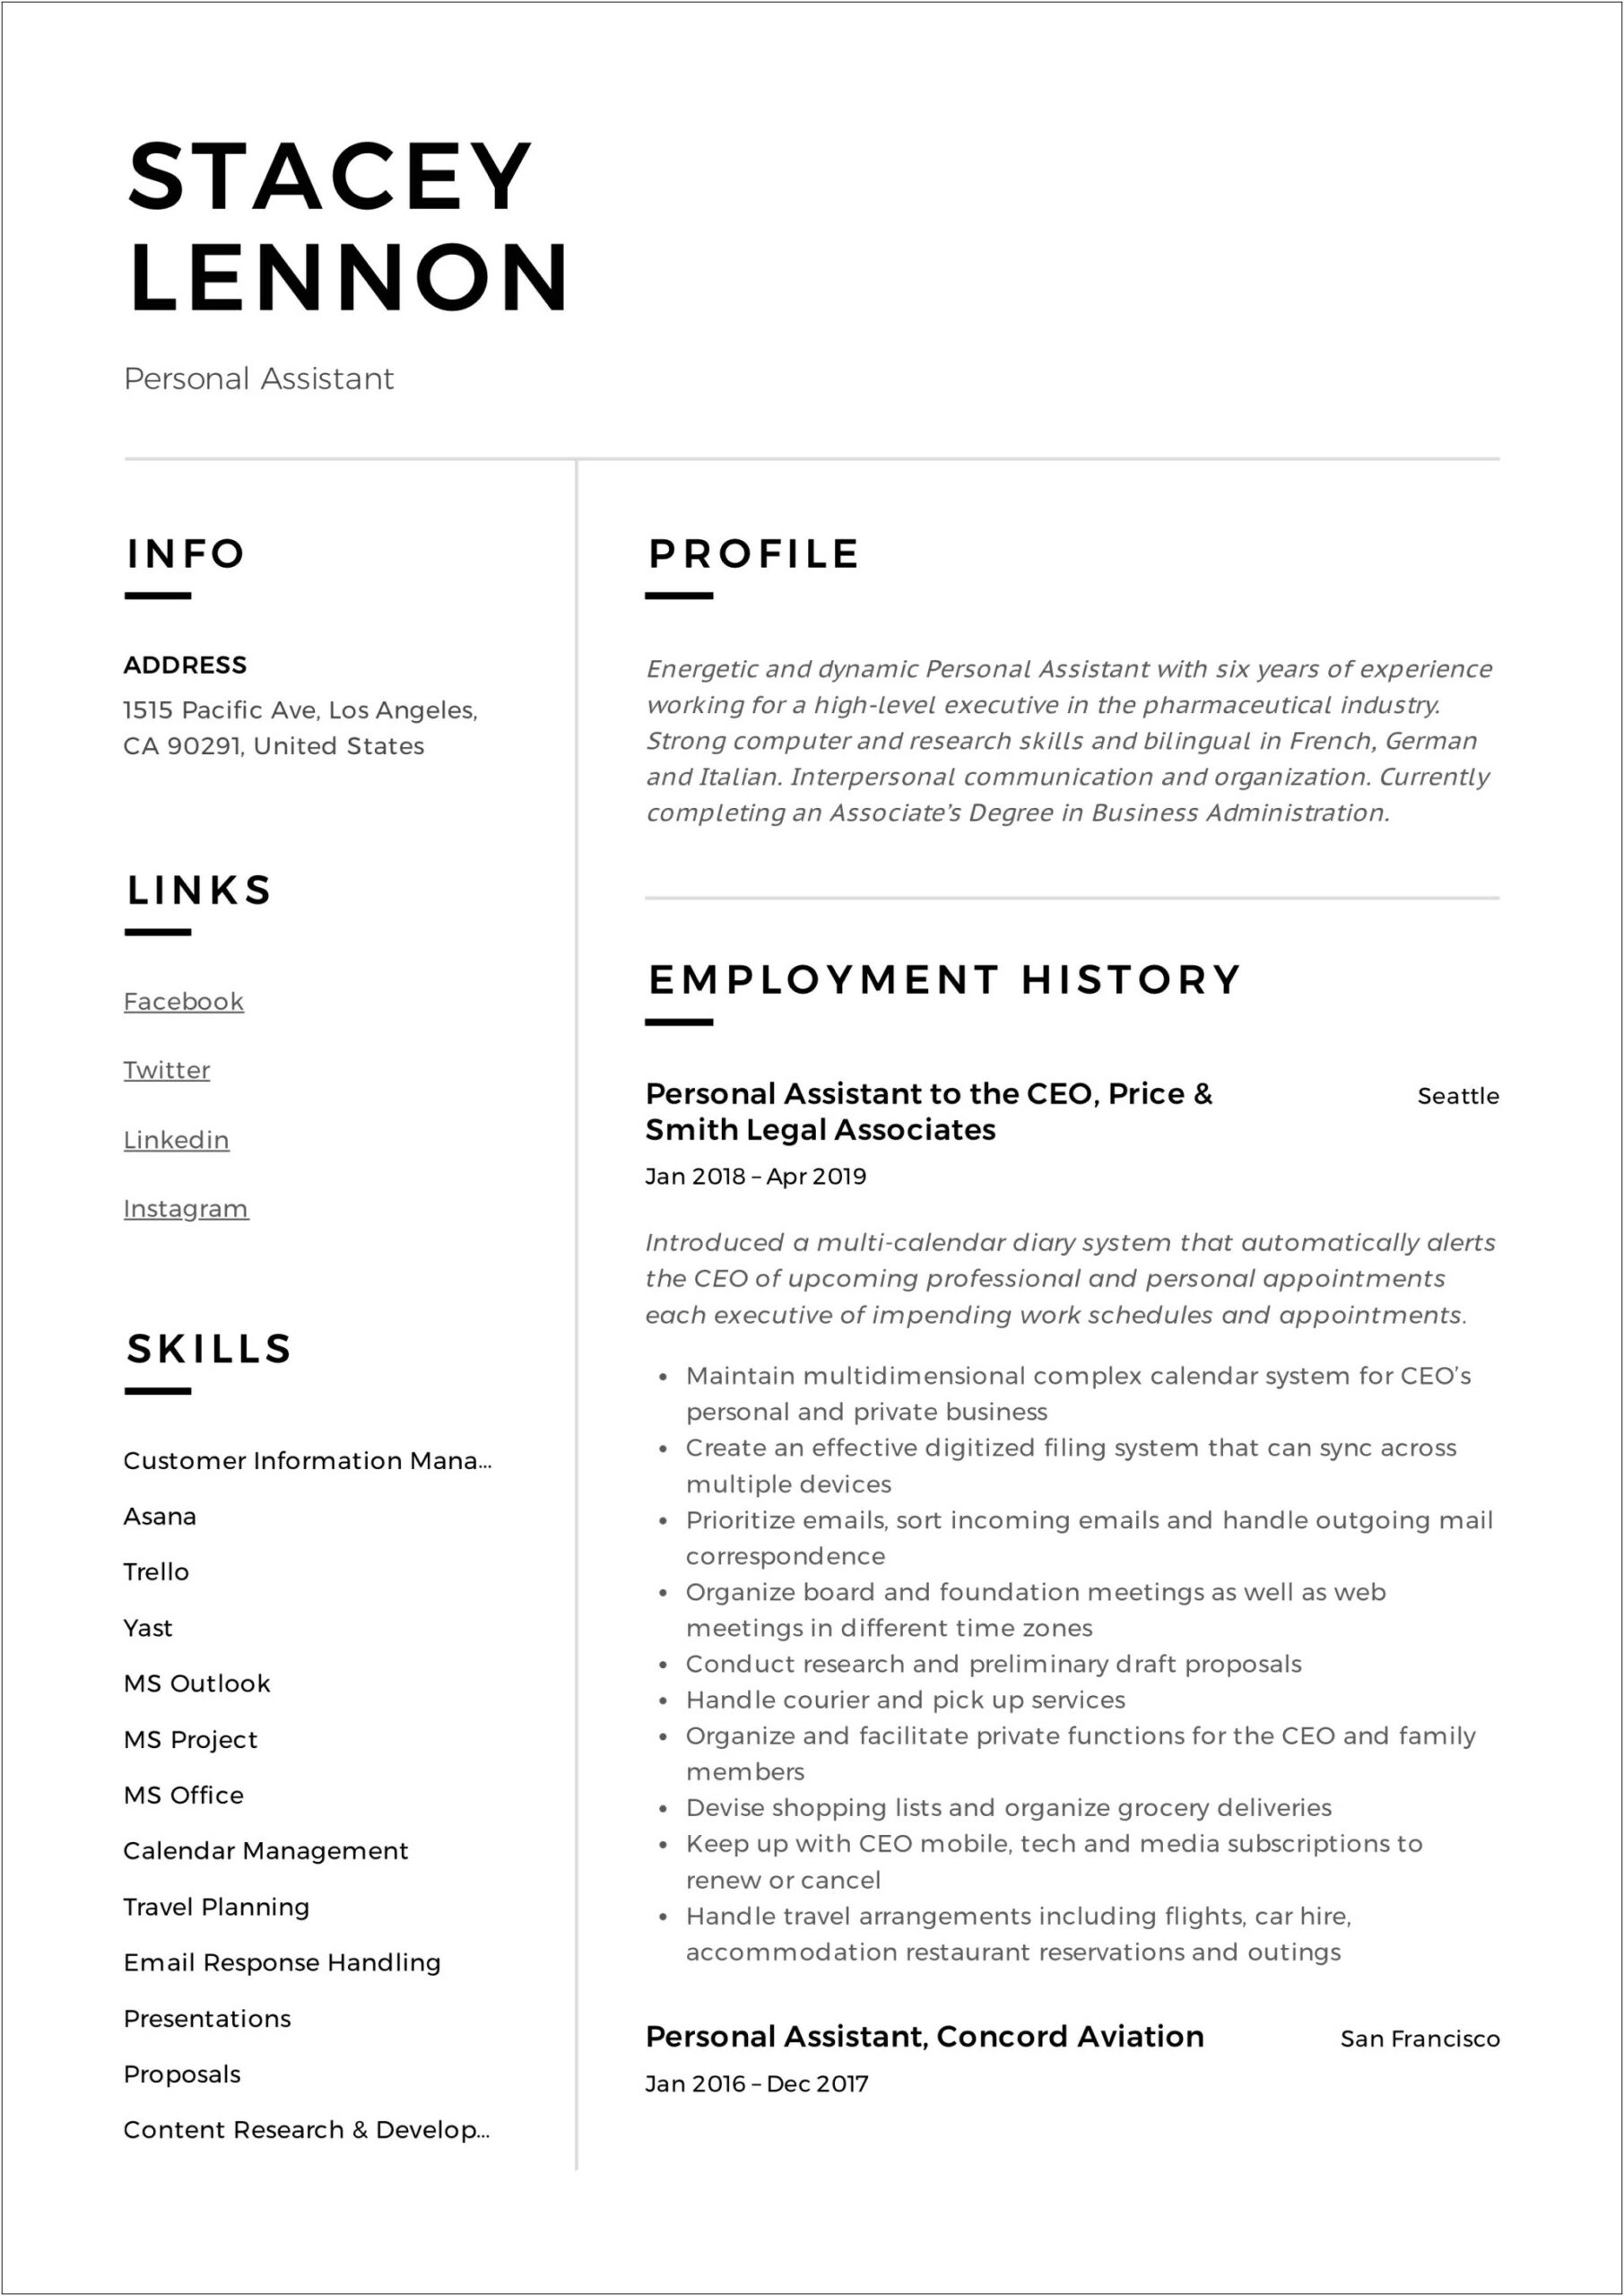 Skills And Personal Attributes On Resume